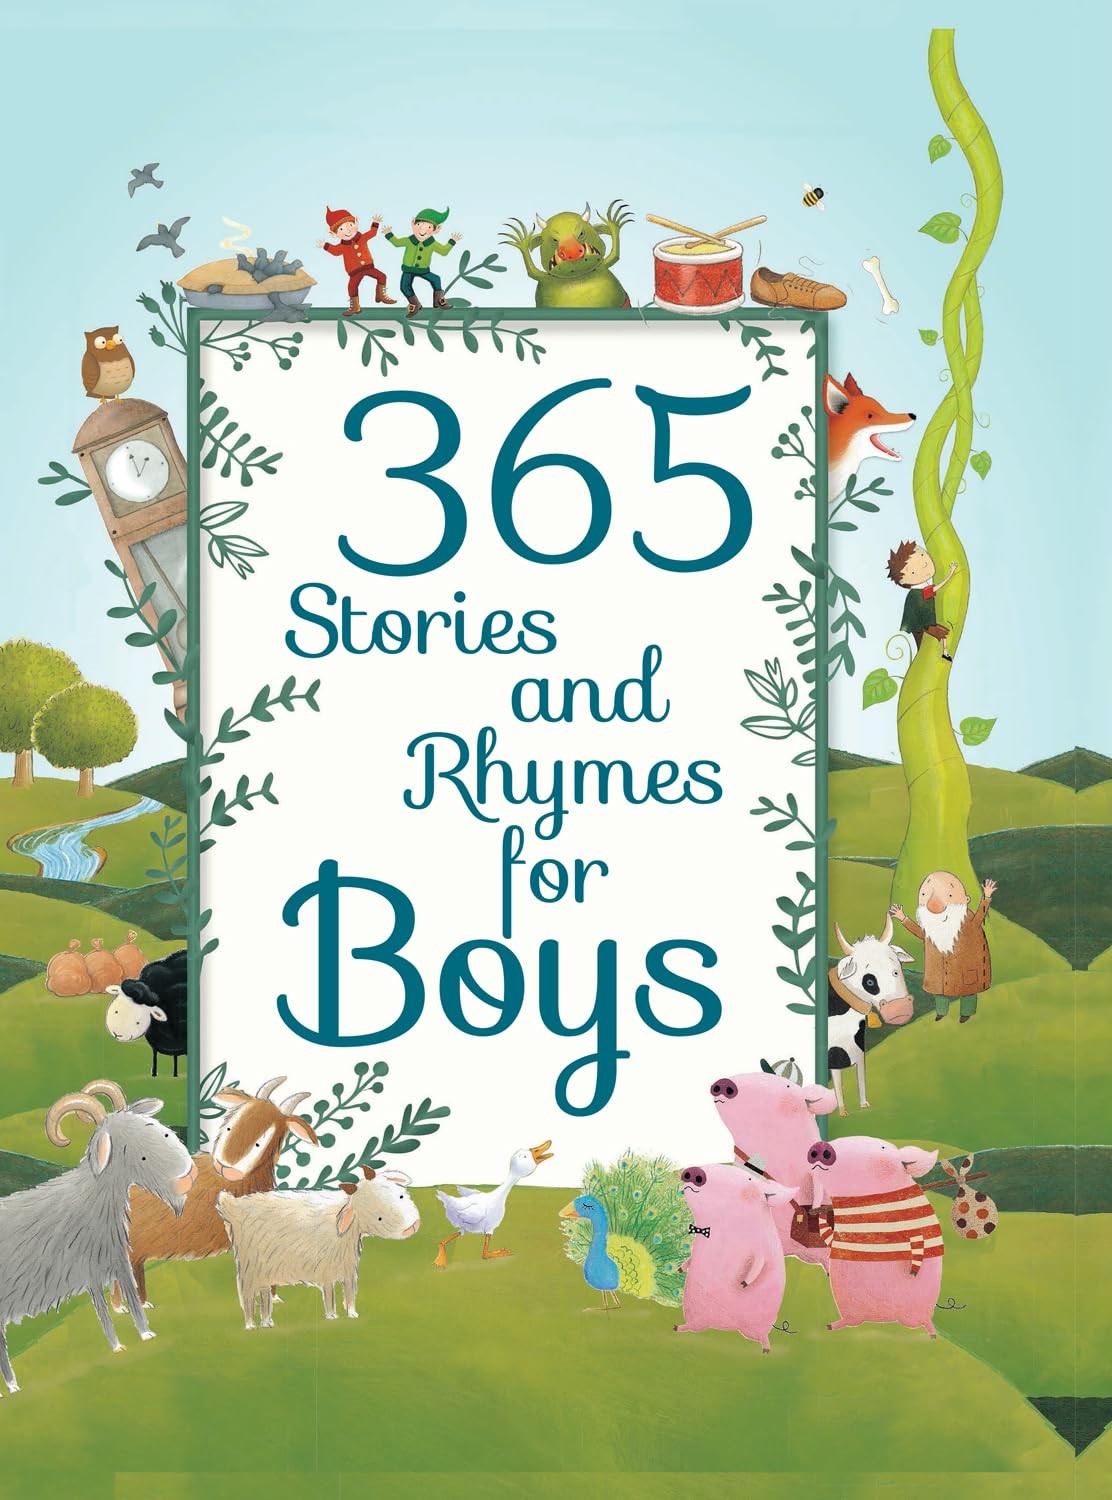 365 Stories and Rhymes for Boys